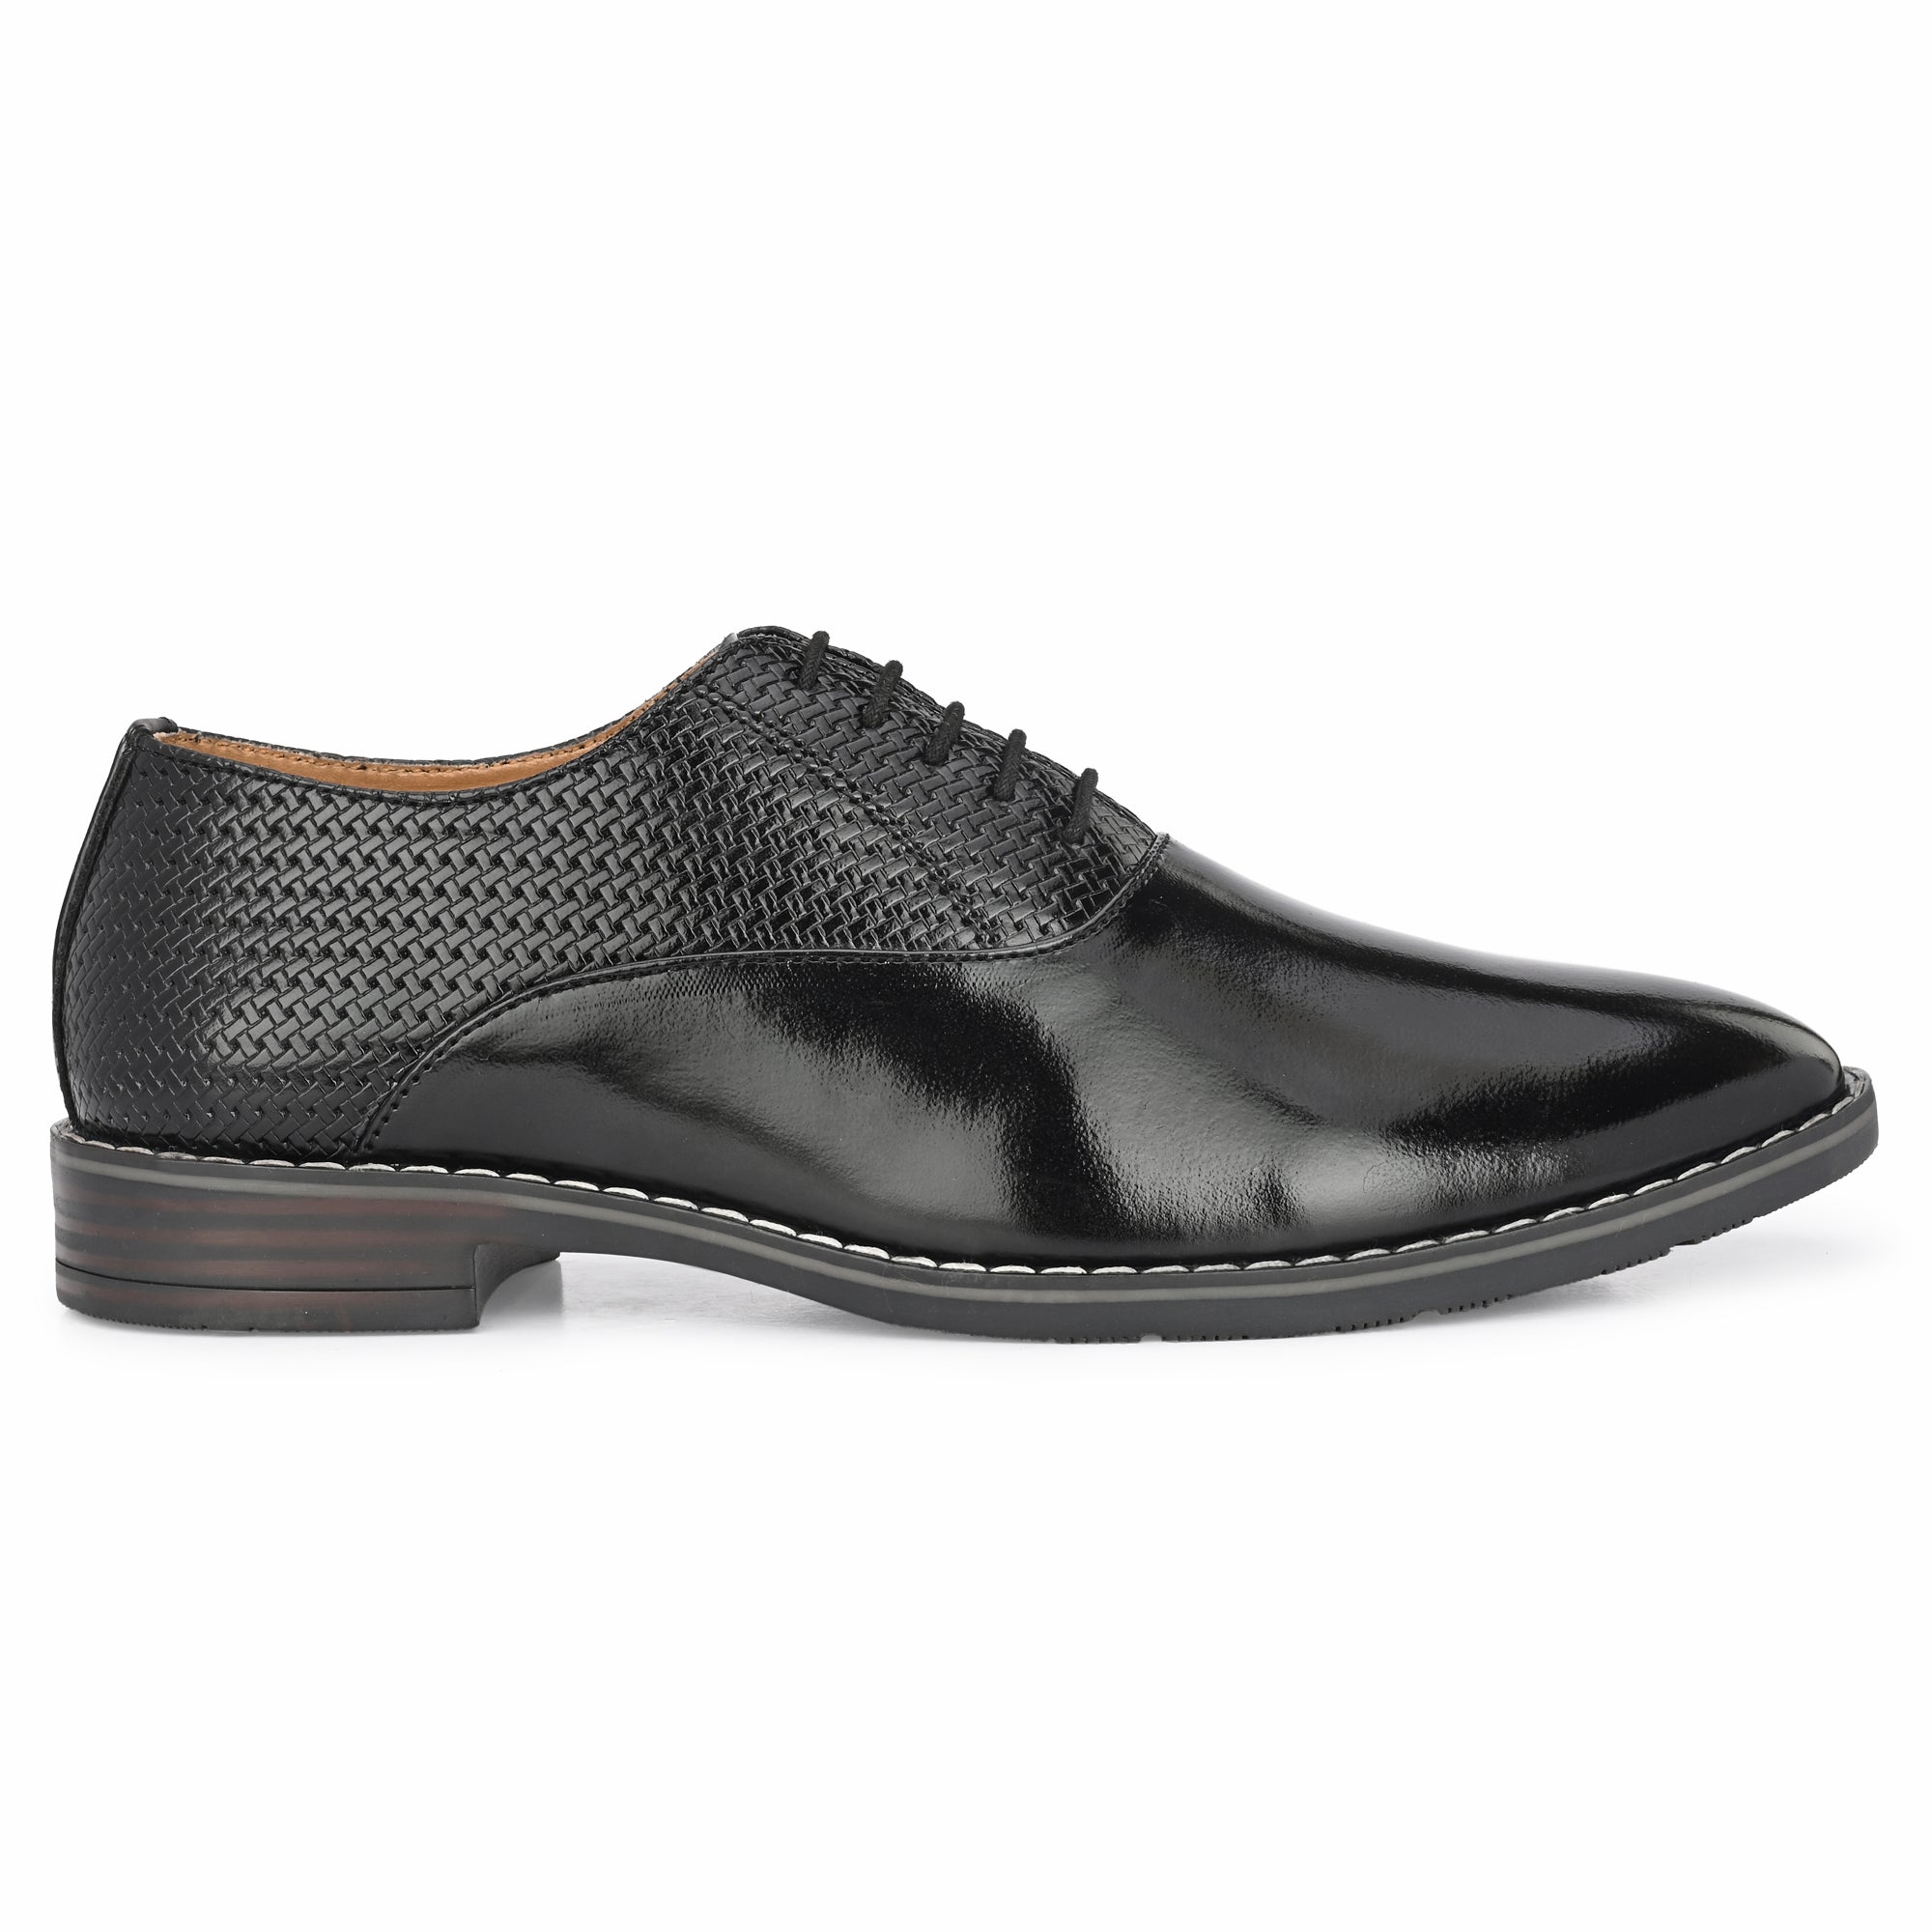 Attitudist Handcrafted Oxford Glossy Black Laceup